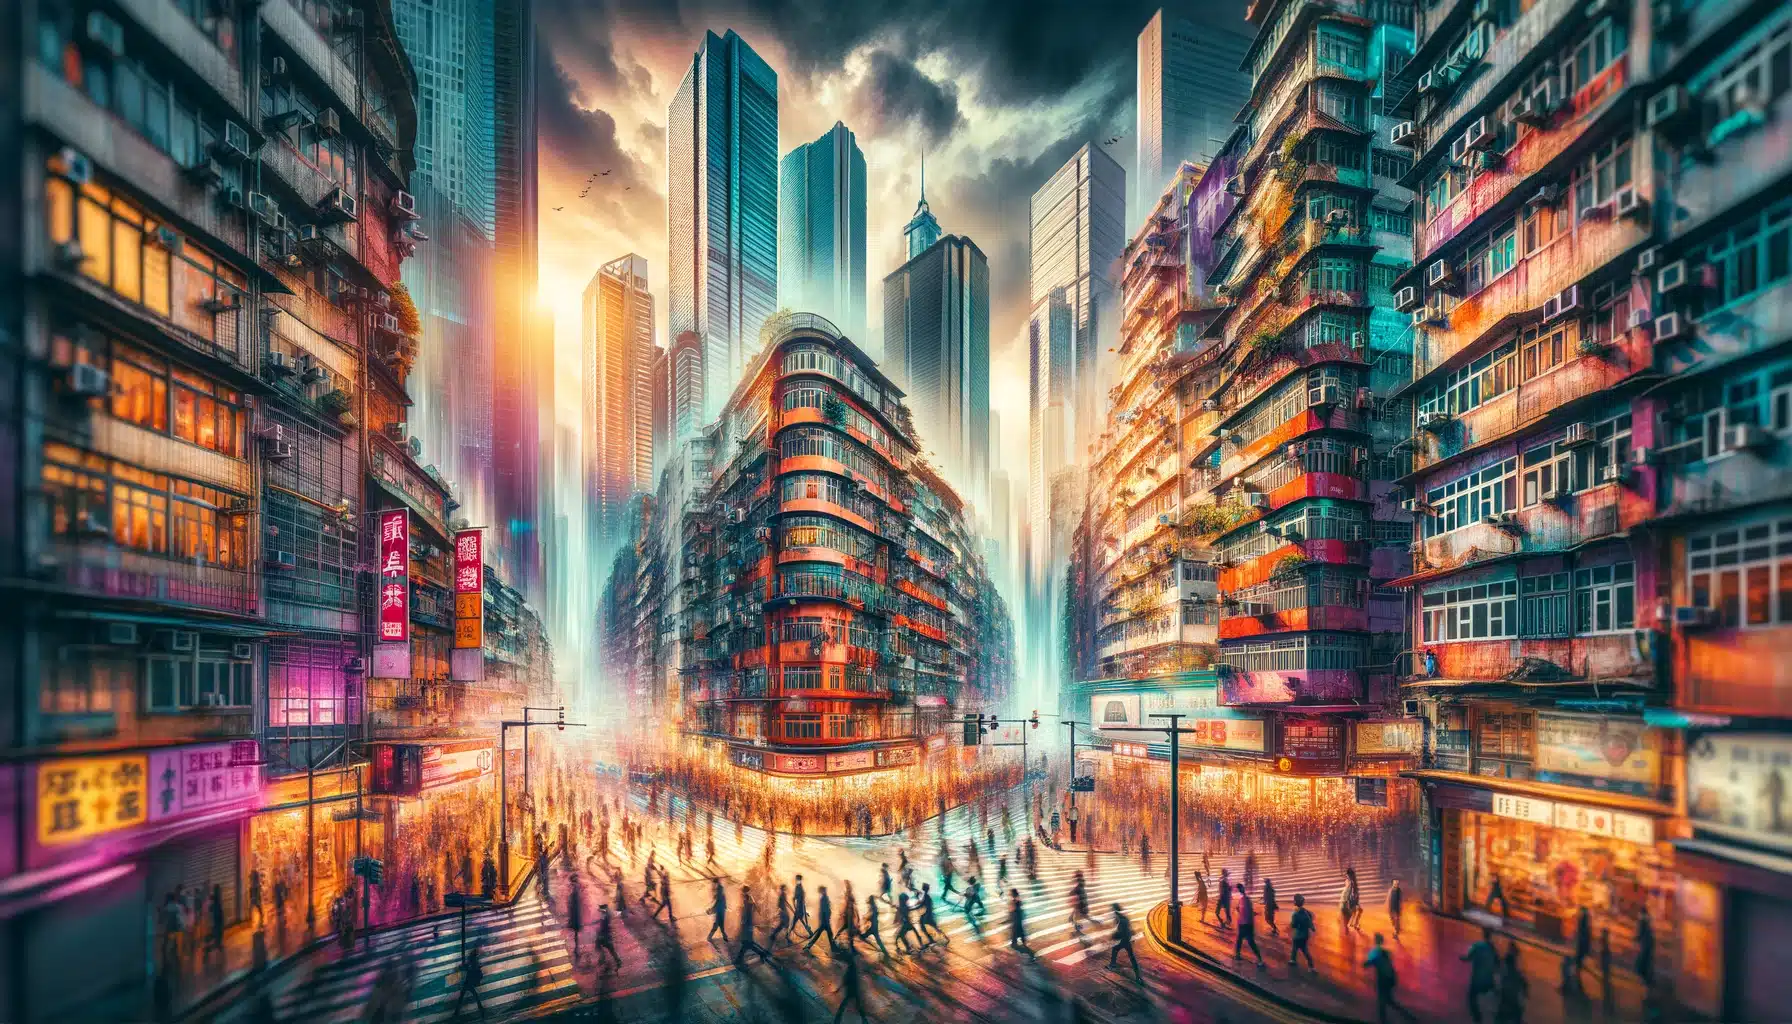 A wide-angle view of a bustling city scene from a street photographer's perspective, featuring tall buildings, vibrant colors, and dramatic lighting, with crowds of people moving through the urban landscape.